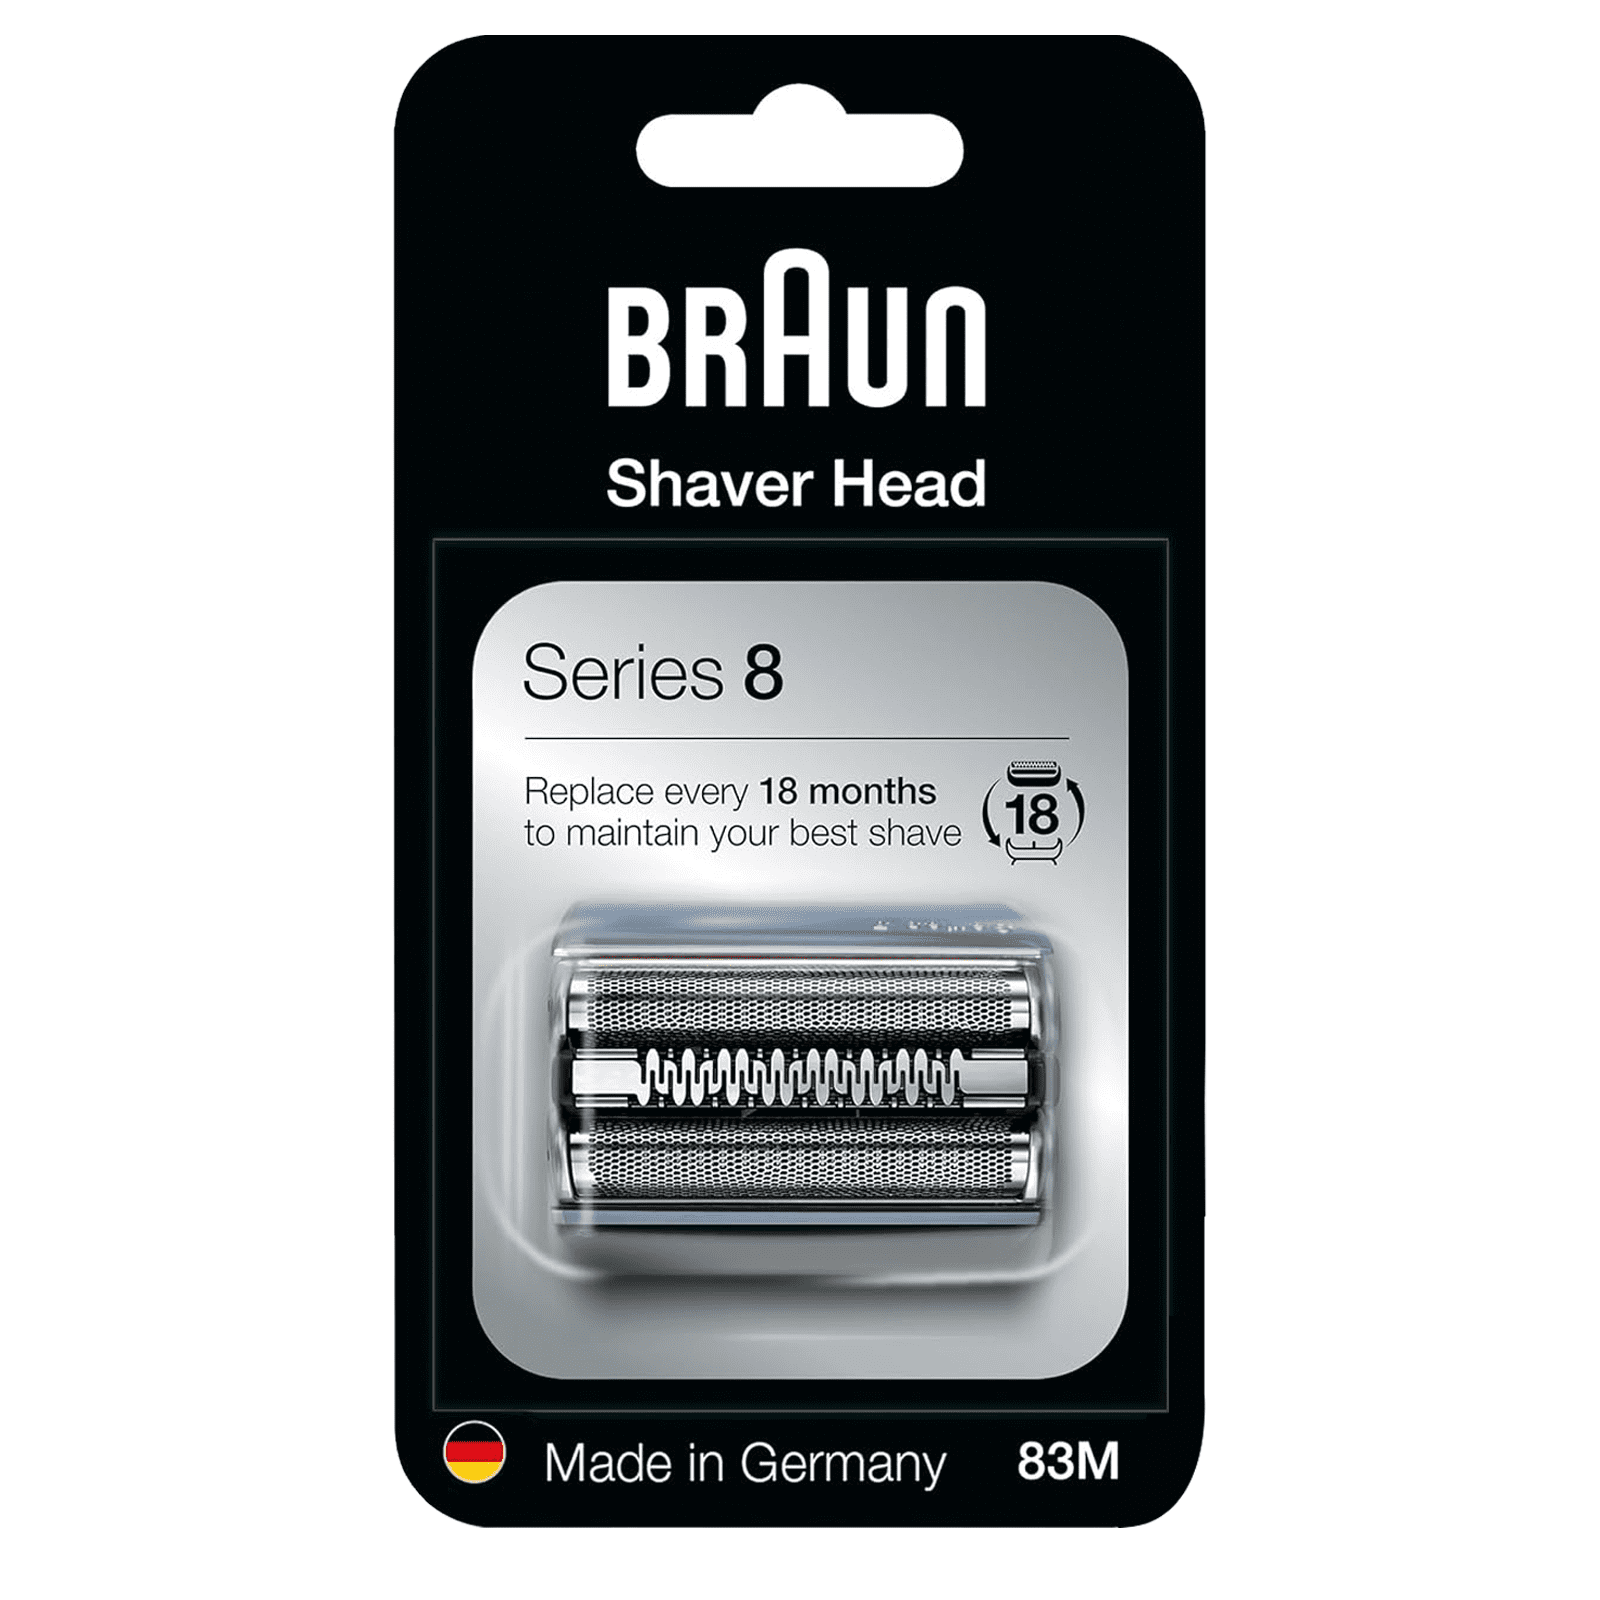 83M S8 Electric Replacement Shaver Head Accessories for Braun Series8  Shaving Razor Head, Cassette,Compatible with all Braun Series 8 83M 8370cc  9340s 